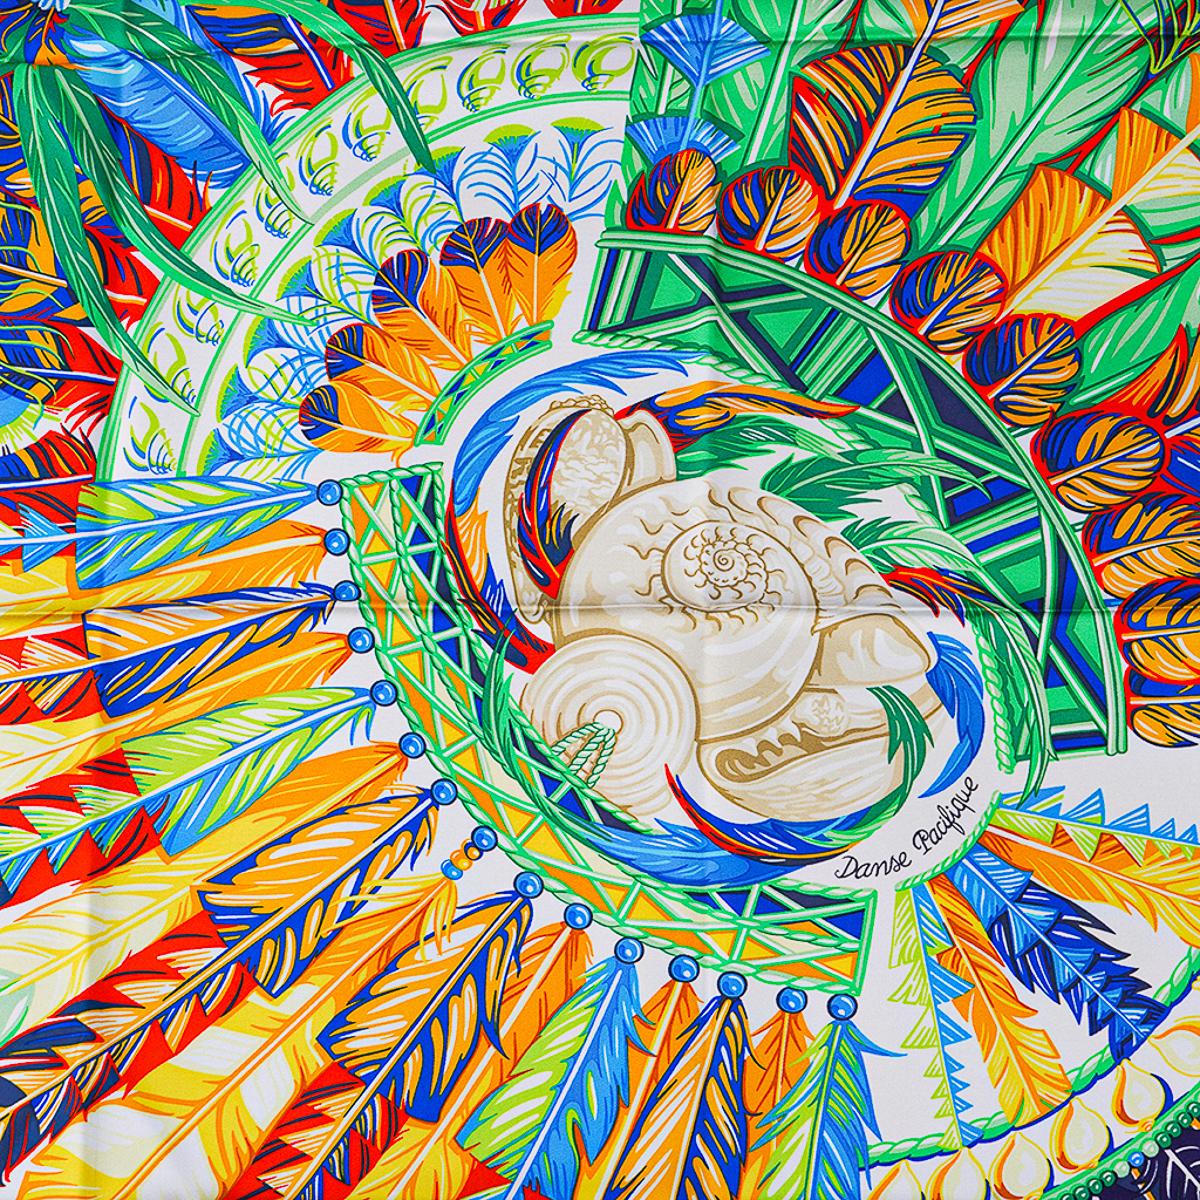 Mightychic offers an Hermes Danse Pacifique Silk scarf by Laurence Bourthoumieux.
Pays tribute to the culture of New Guinea.
Features the feather and cowry adorned headdresses of the Pacific.
Gris Argent, Vert, Jaune colorway.
Signature hand rolled